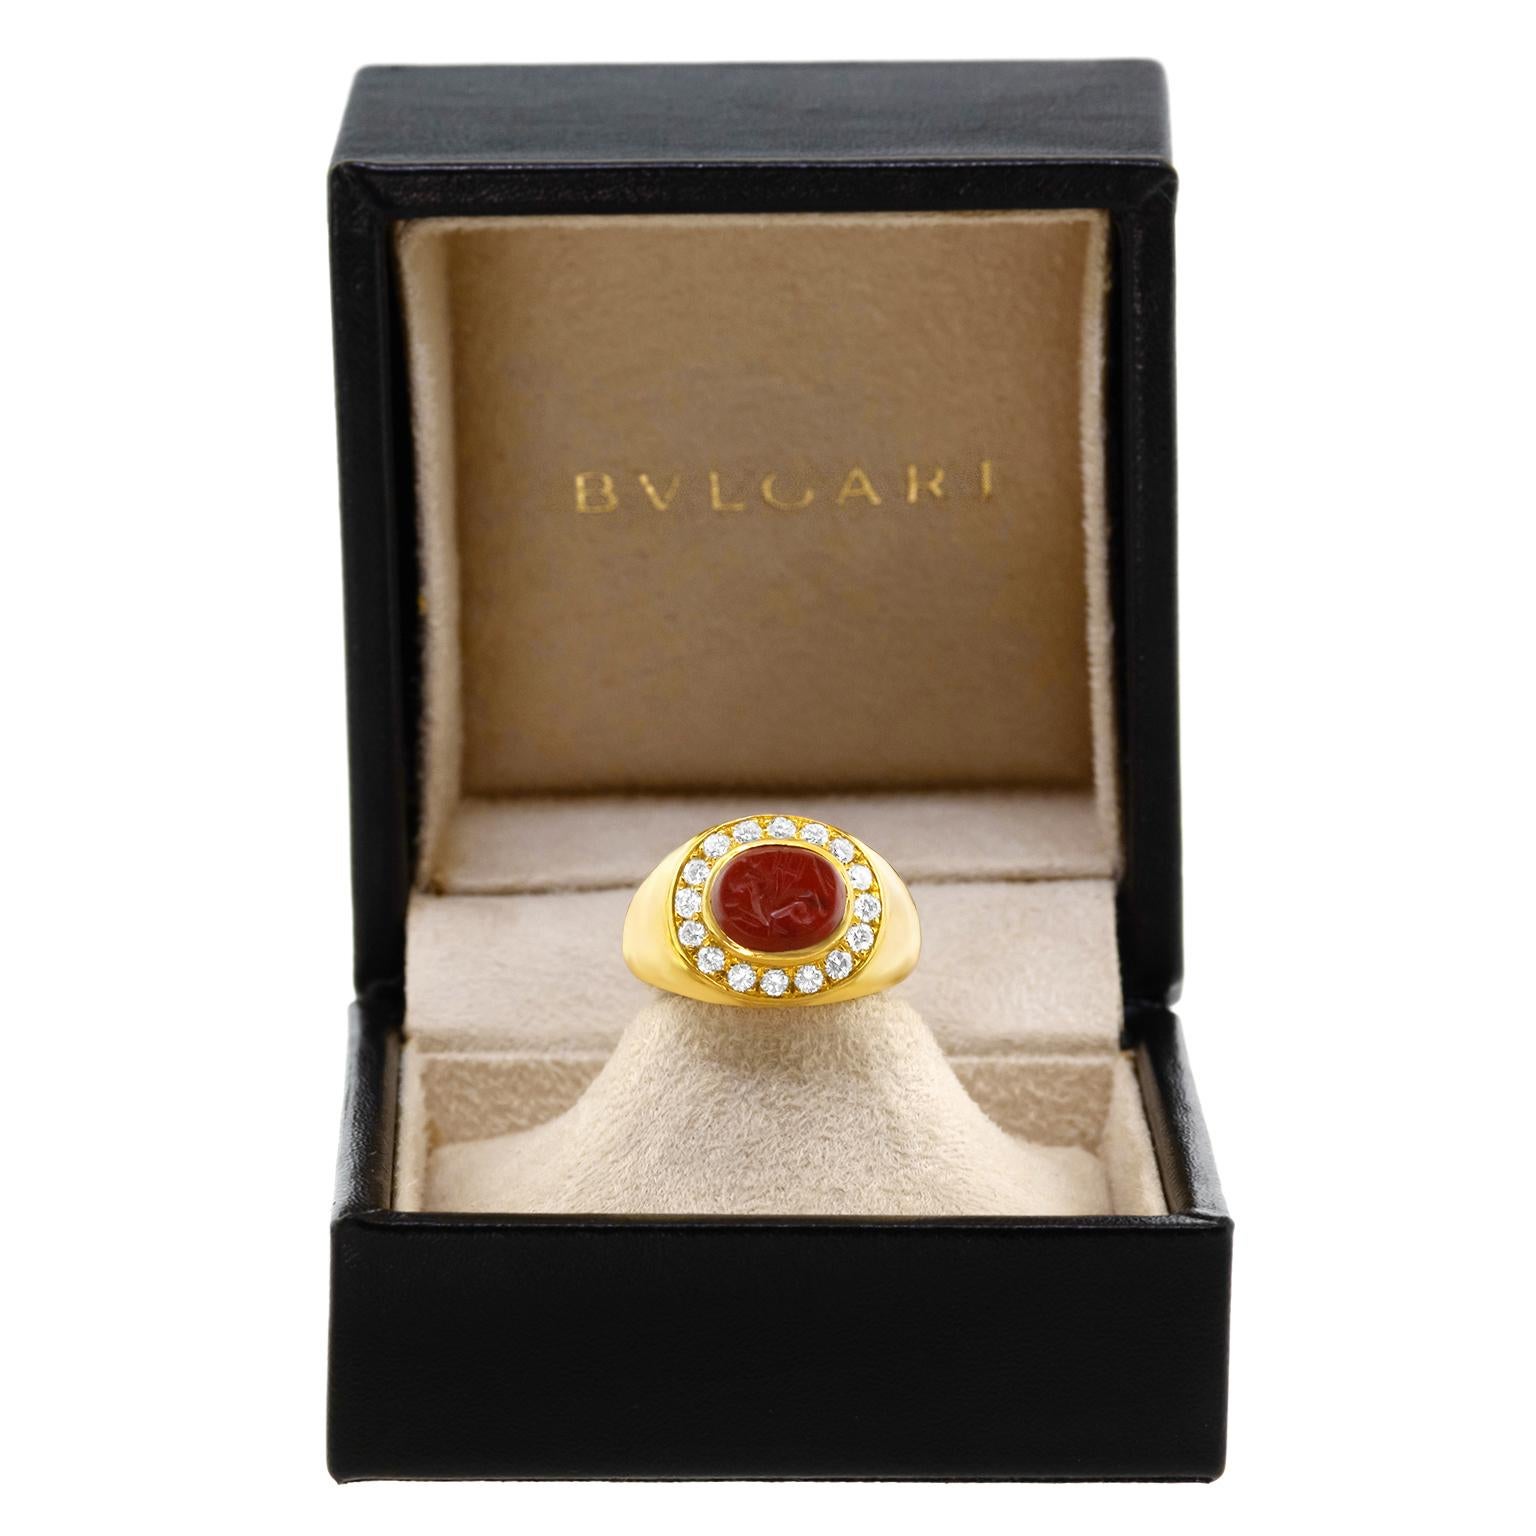 Circa 1970s, 18k, by Bvlgari, Italy.  This Bvlgari ring is stylish seventies fashion, perfect for modern looks, and everyday wear. The vibrant jasper seal features an intaglio-cut image of a hippocampus and trident, set in eighteen-karat yellow gold